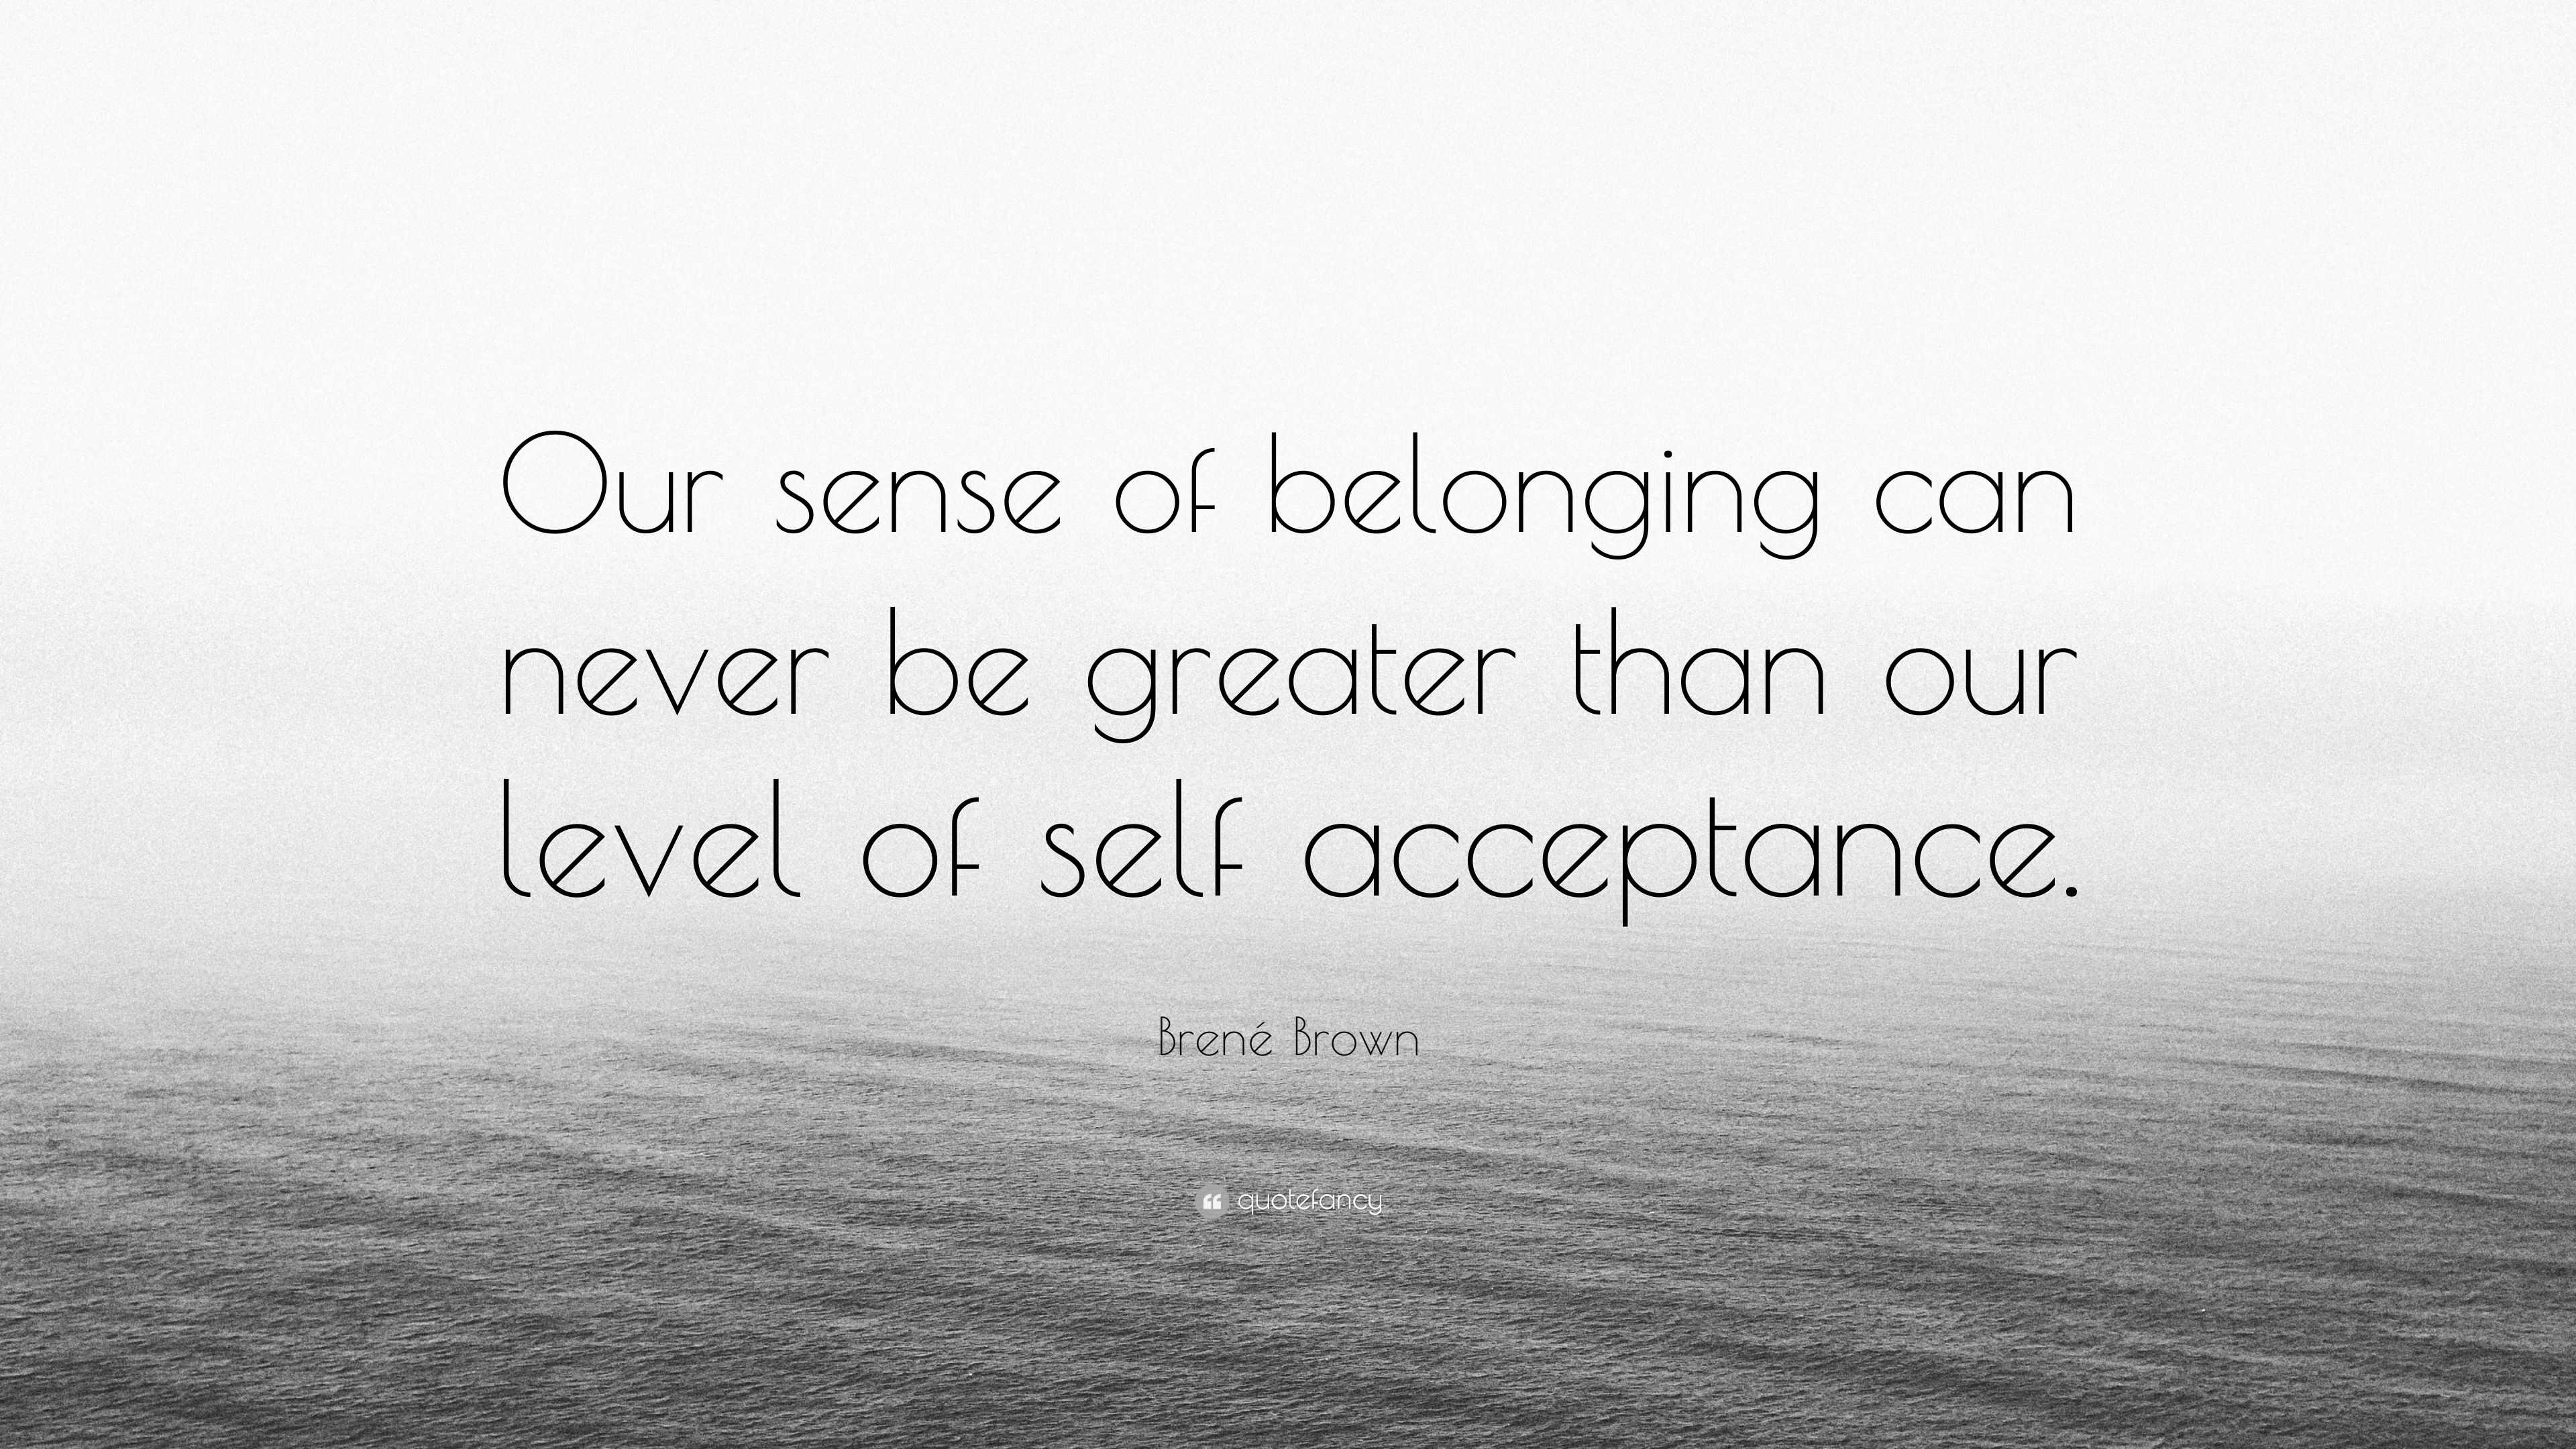 Brené Brown Quote: “Our sense of belonging can never be greater than